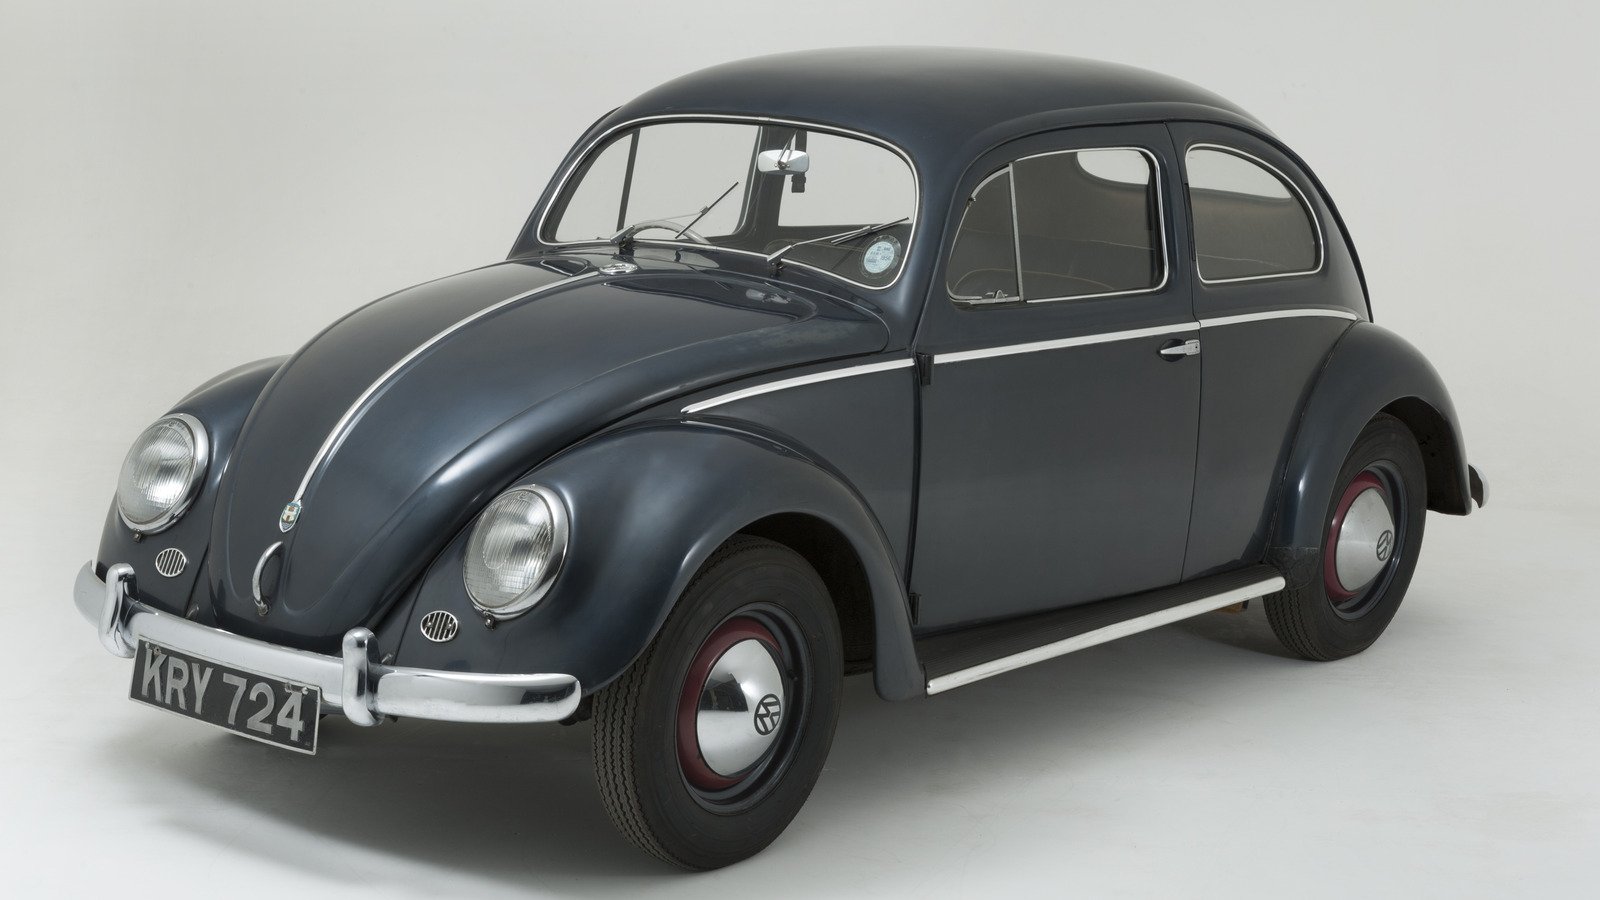 The Reason Why The VW Beetle Was Banned In The US